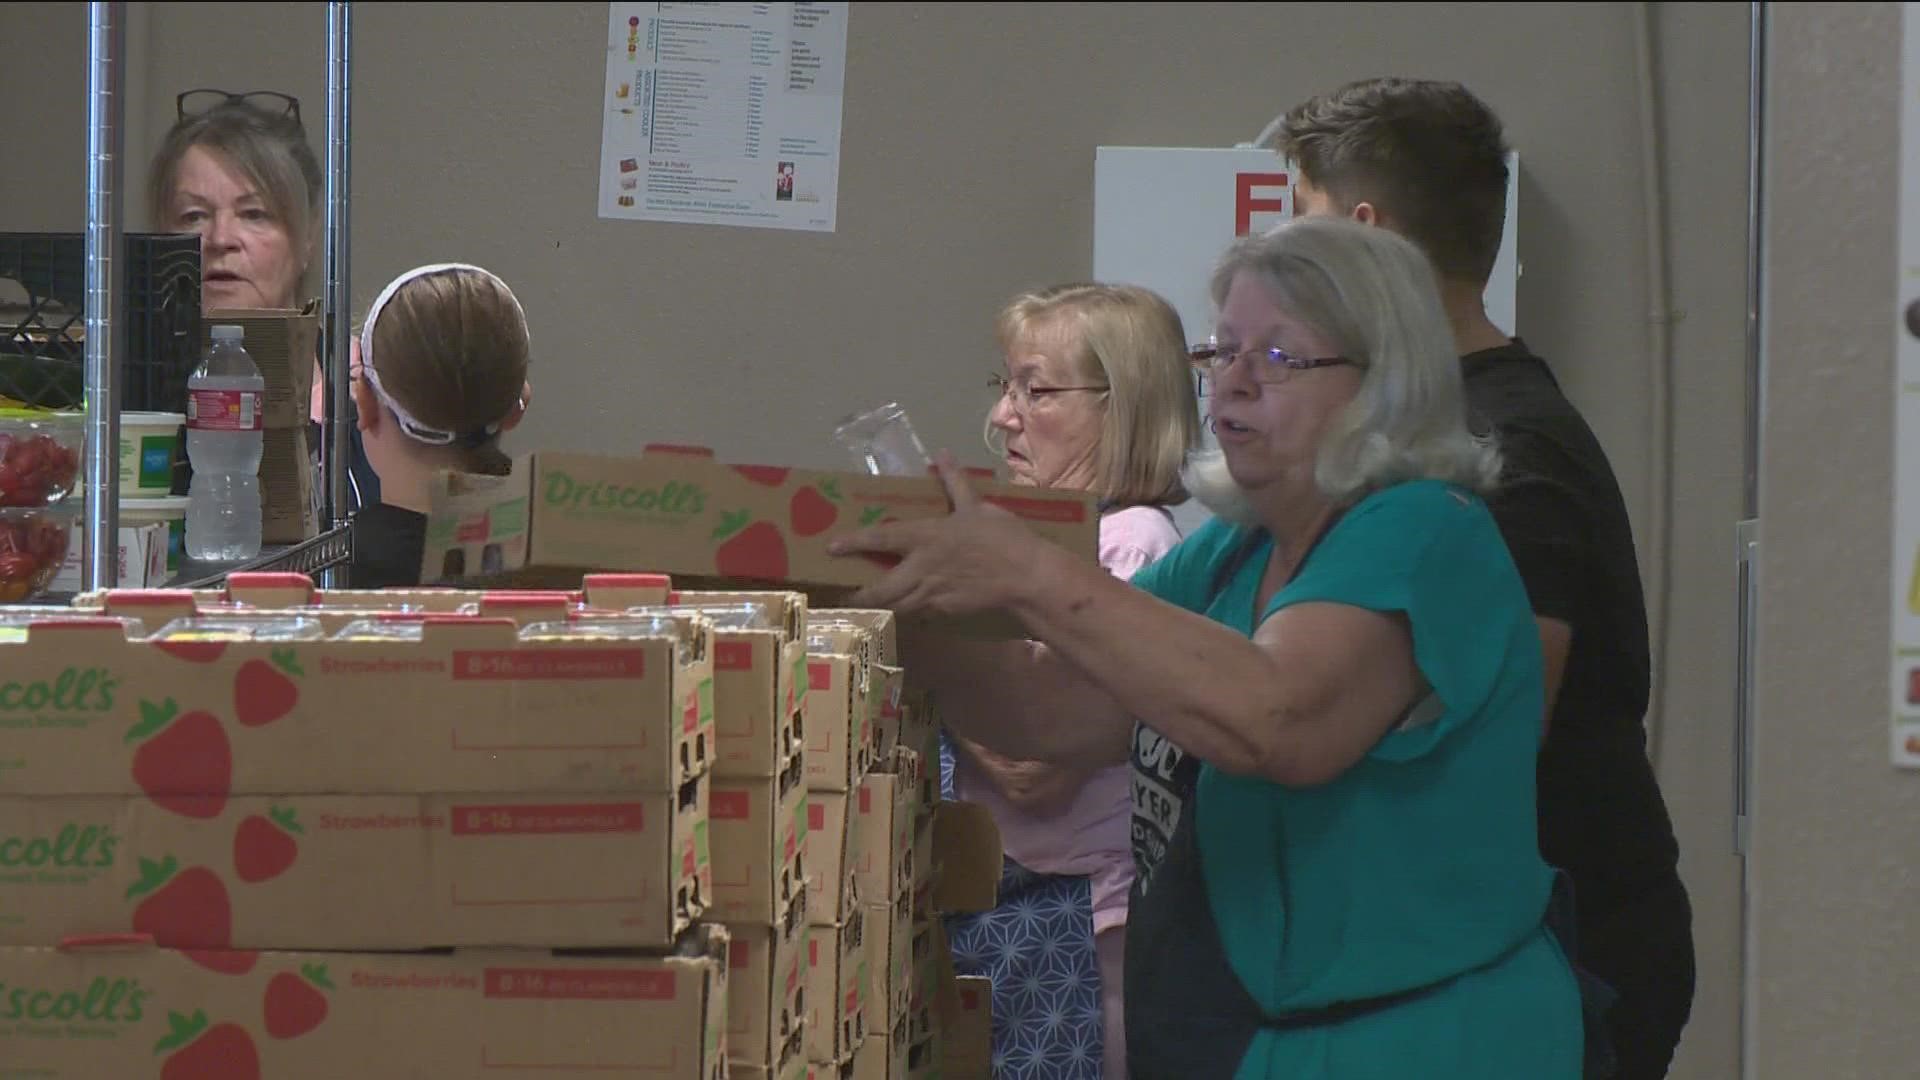 Meridian Foodbank Executive Director, Dan Clark, said they went from serving about 2,800 people each month to 4,200 in one year.